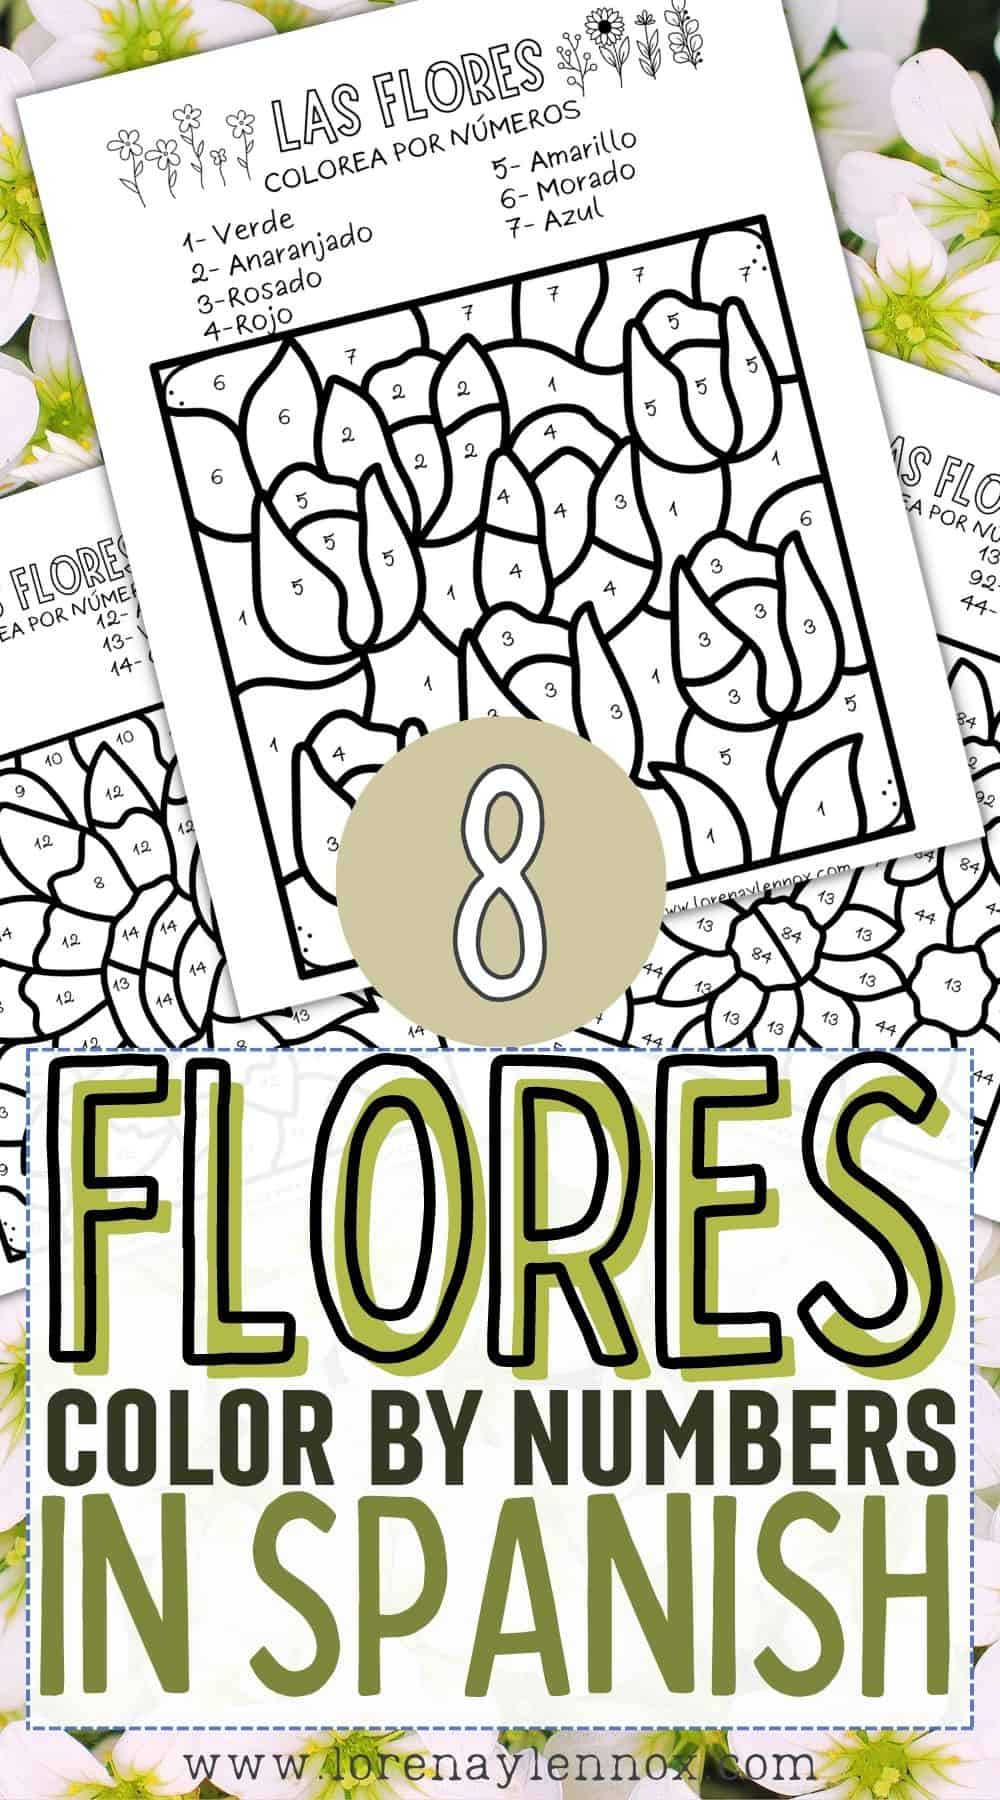 8 Flower Color by Number Pages in Spanish